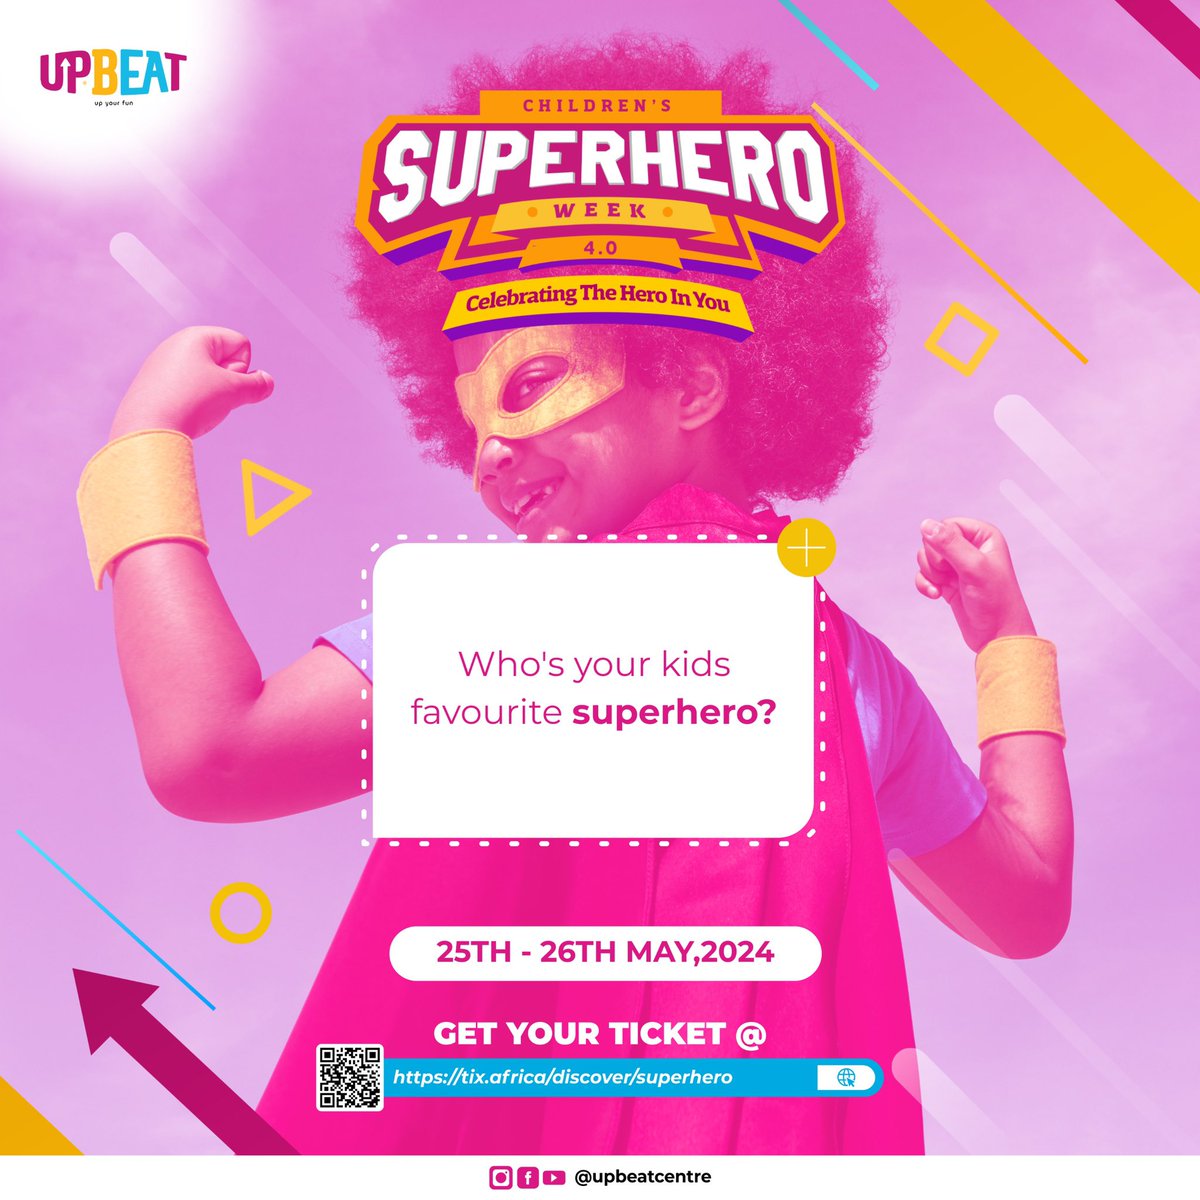 Hey Upbeat Tribe!!!

Tell us who’s your kid’s favorite superhero in the comments!!!

#superheroday #Upbeatcentre #gamefest #lagos #whattodoinlagos #games #fungames #familyfun #fitfun #entertainment